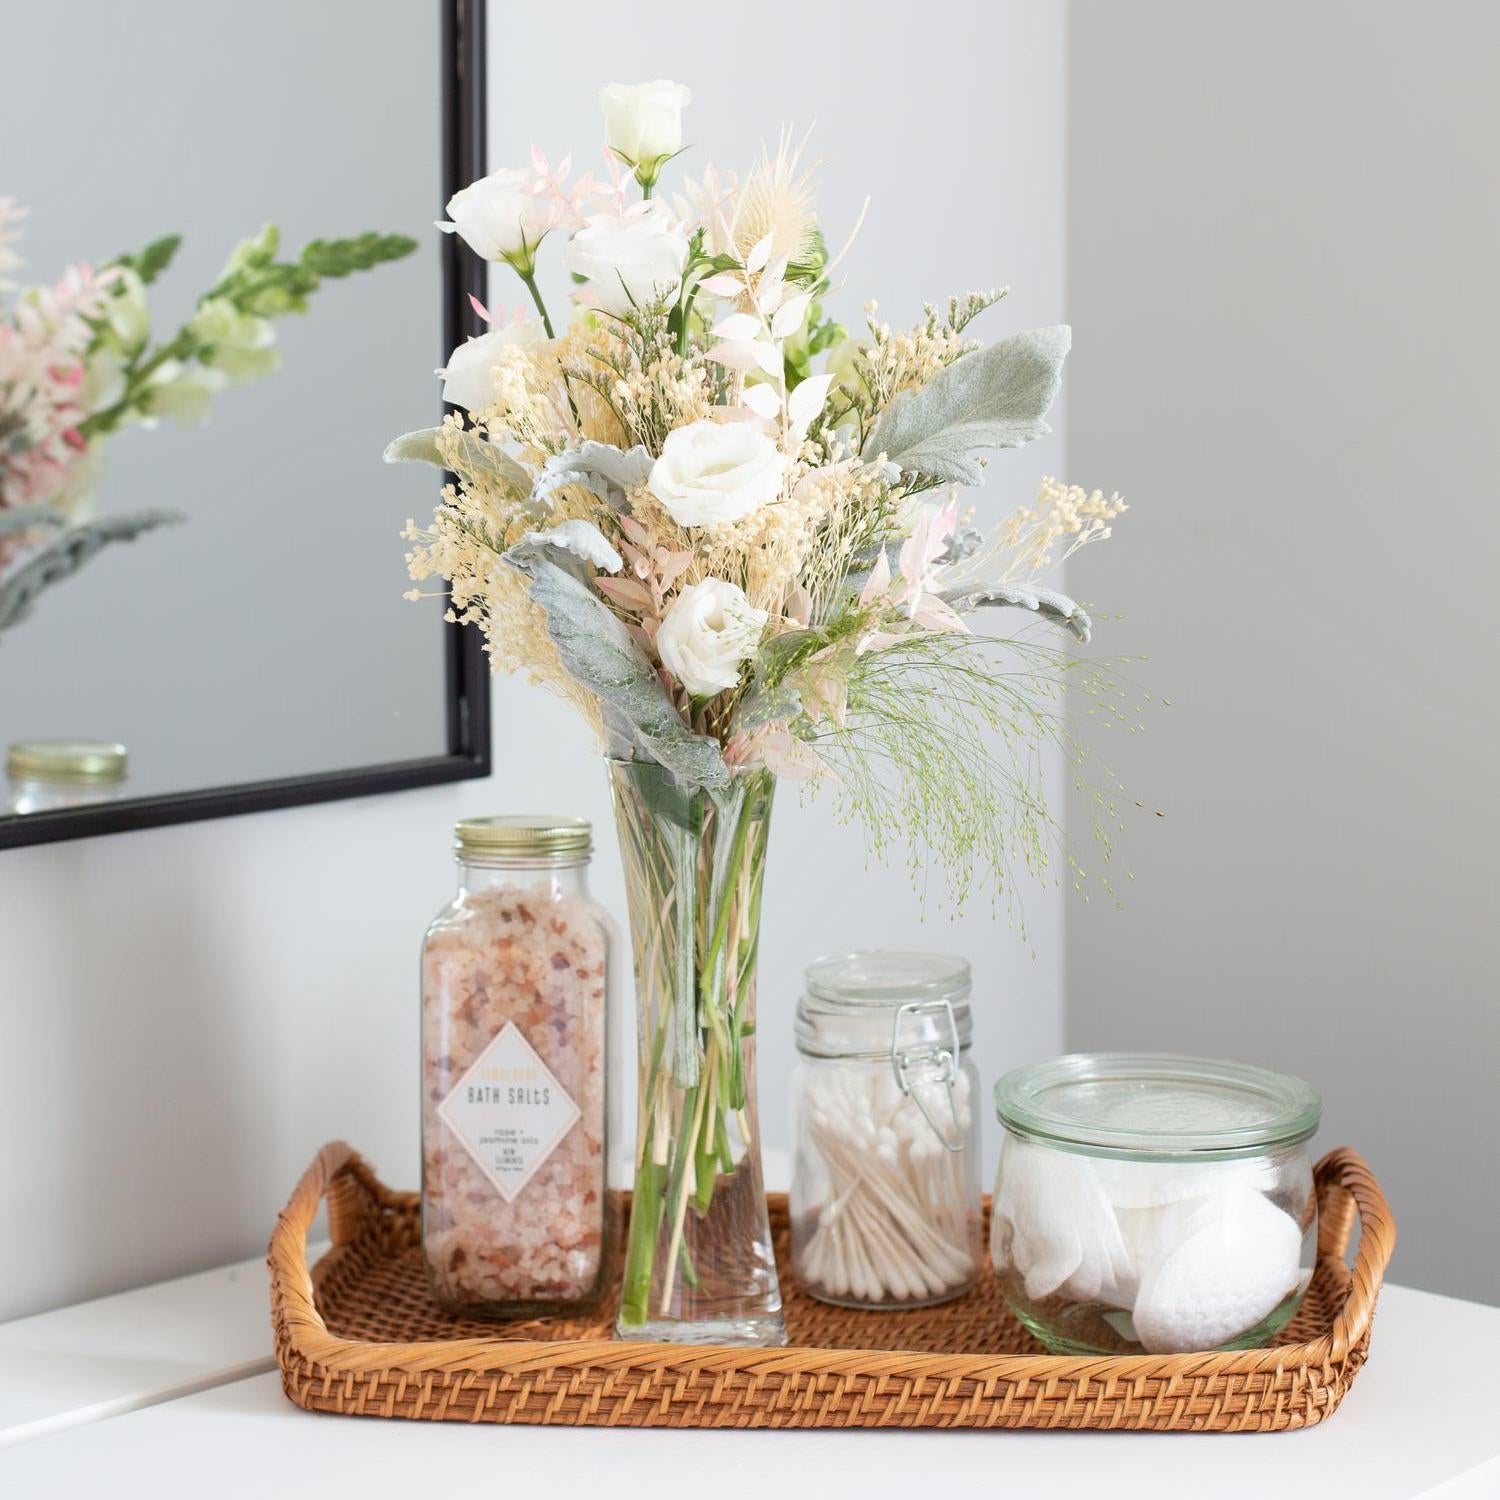 An arrangement within the vase featuring white roses, pale pink flowers, and assorted greenery, placed on a wicker tray beside bath salts and cotton balls, with a bathroom mirror partially visible in the background.